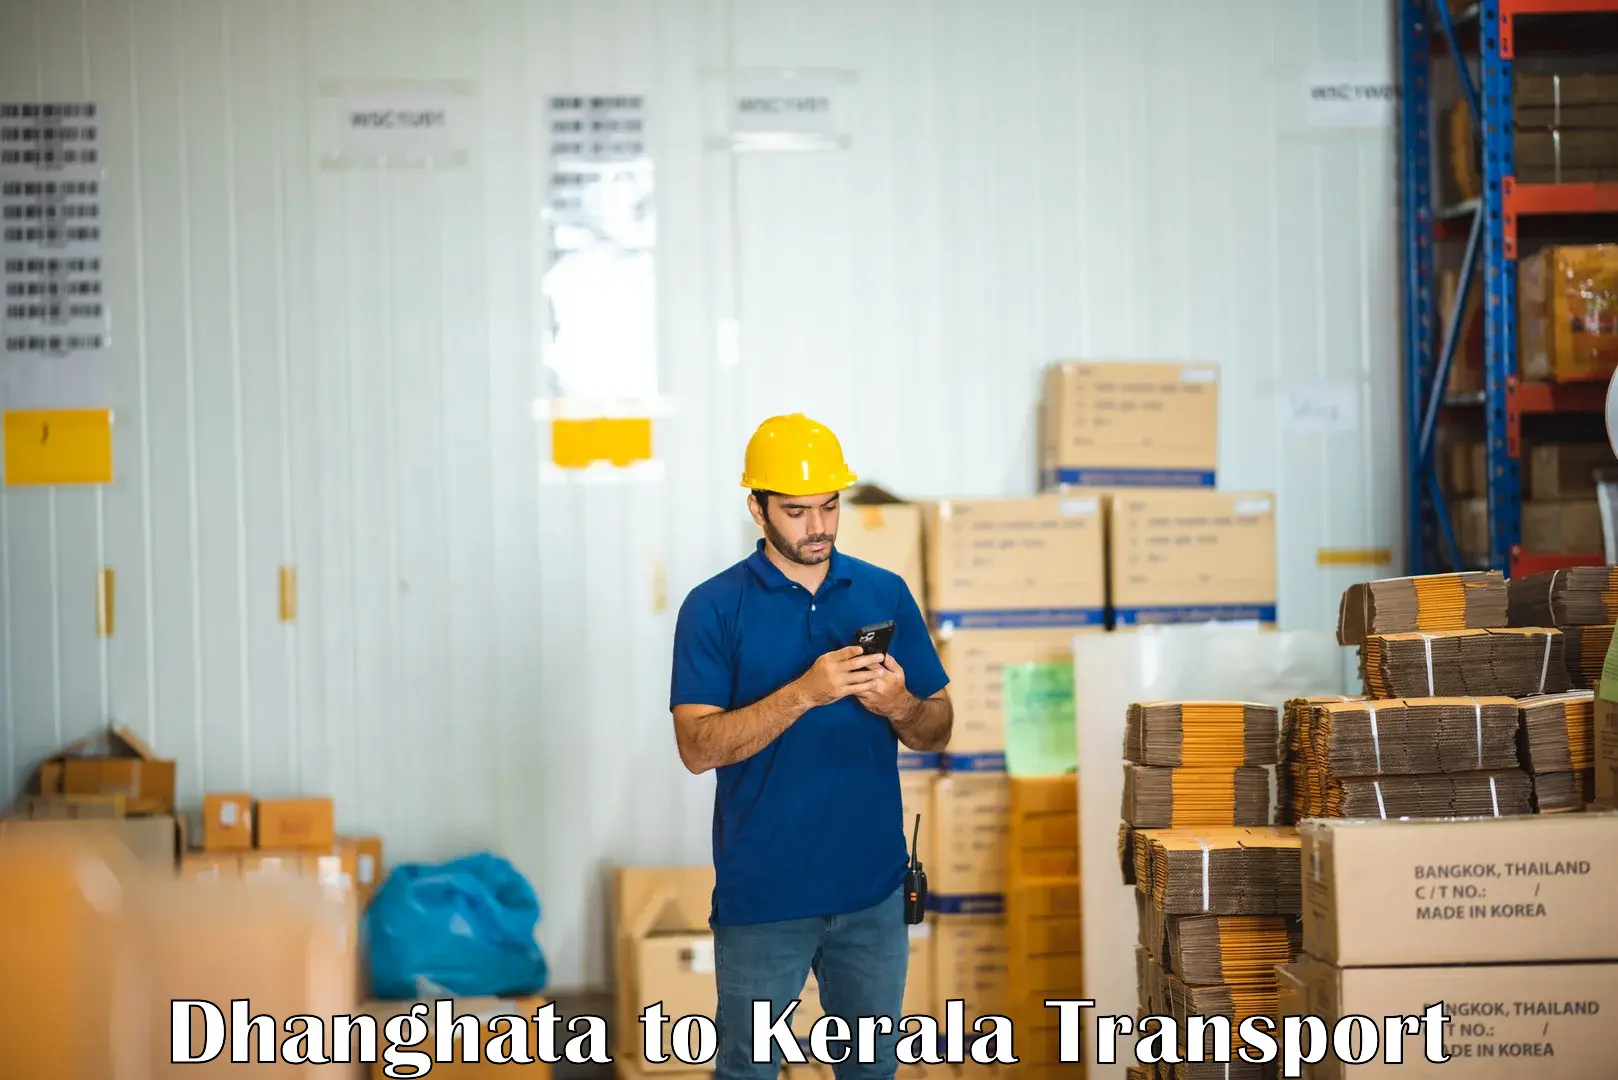 Express transport services in Dhanghata to Thrissur